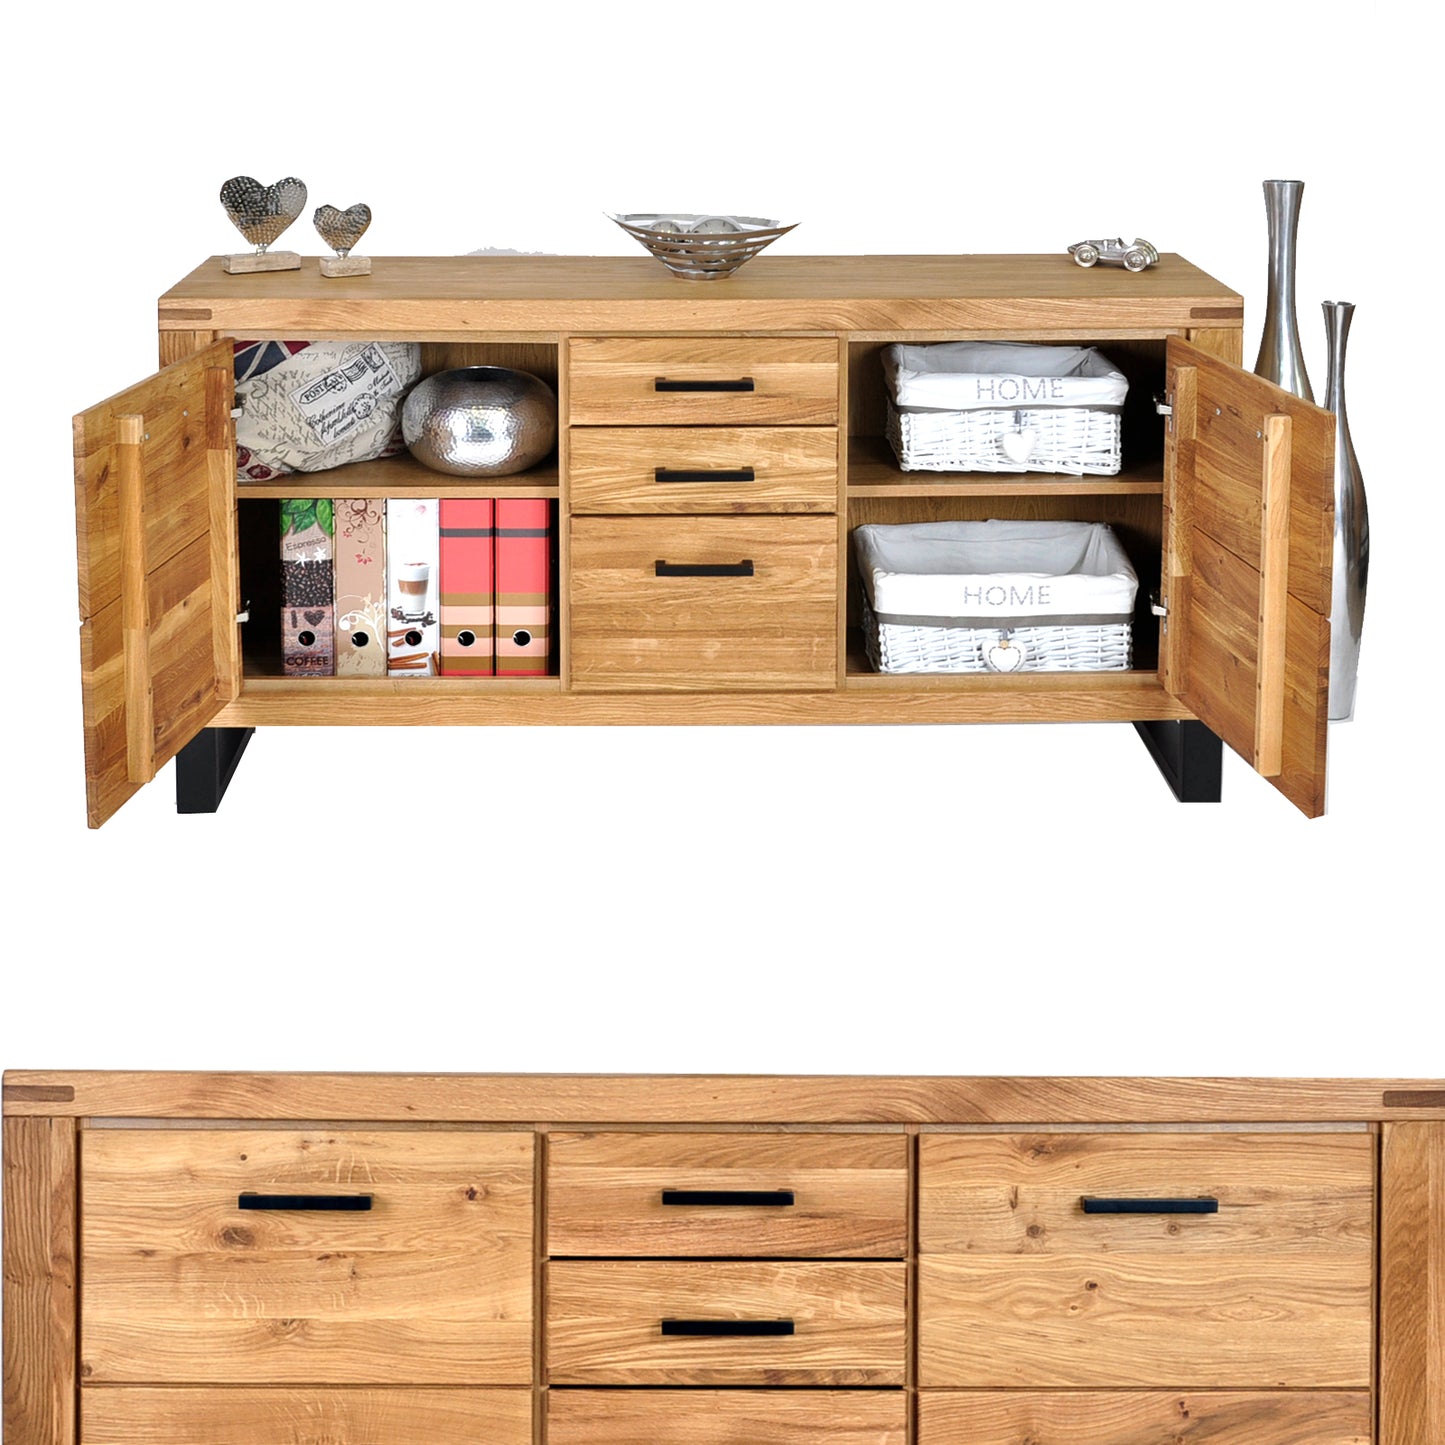 TINA chest of drawers - Made of solid oak with industrial accents